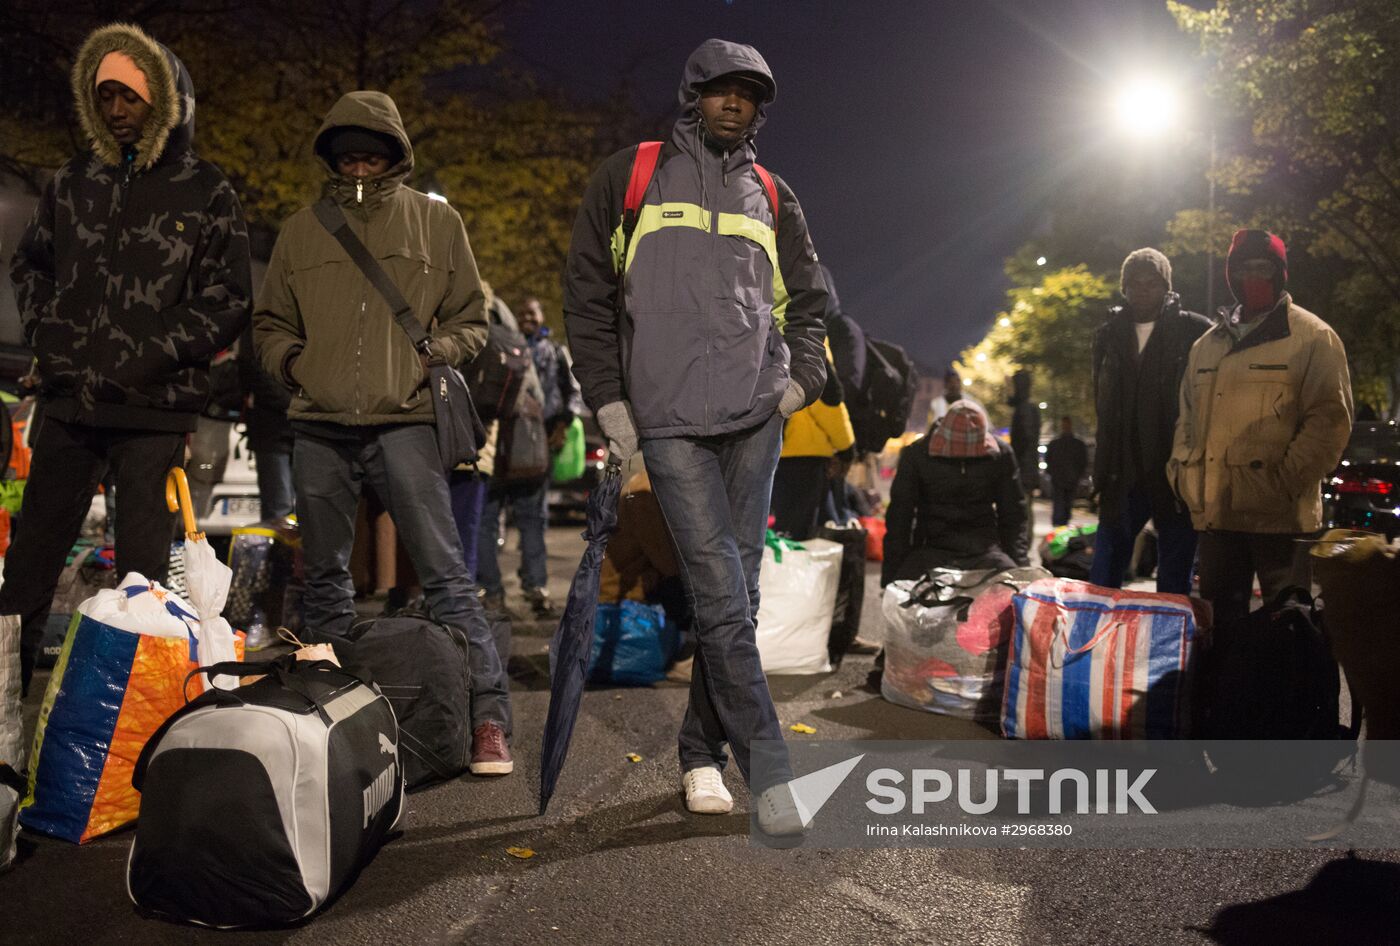 Large migrant camp cleared out in Paris